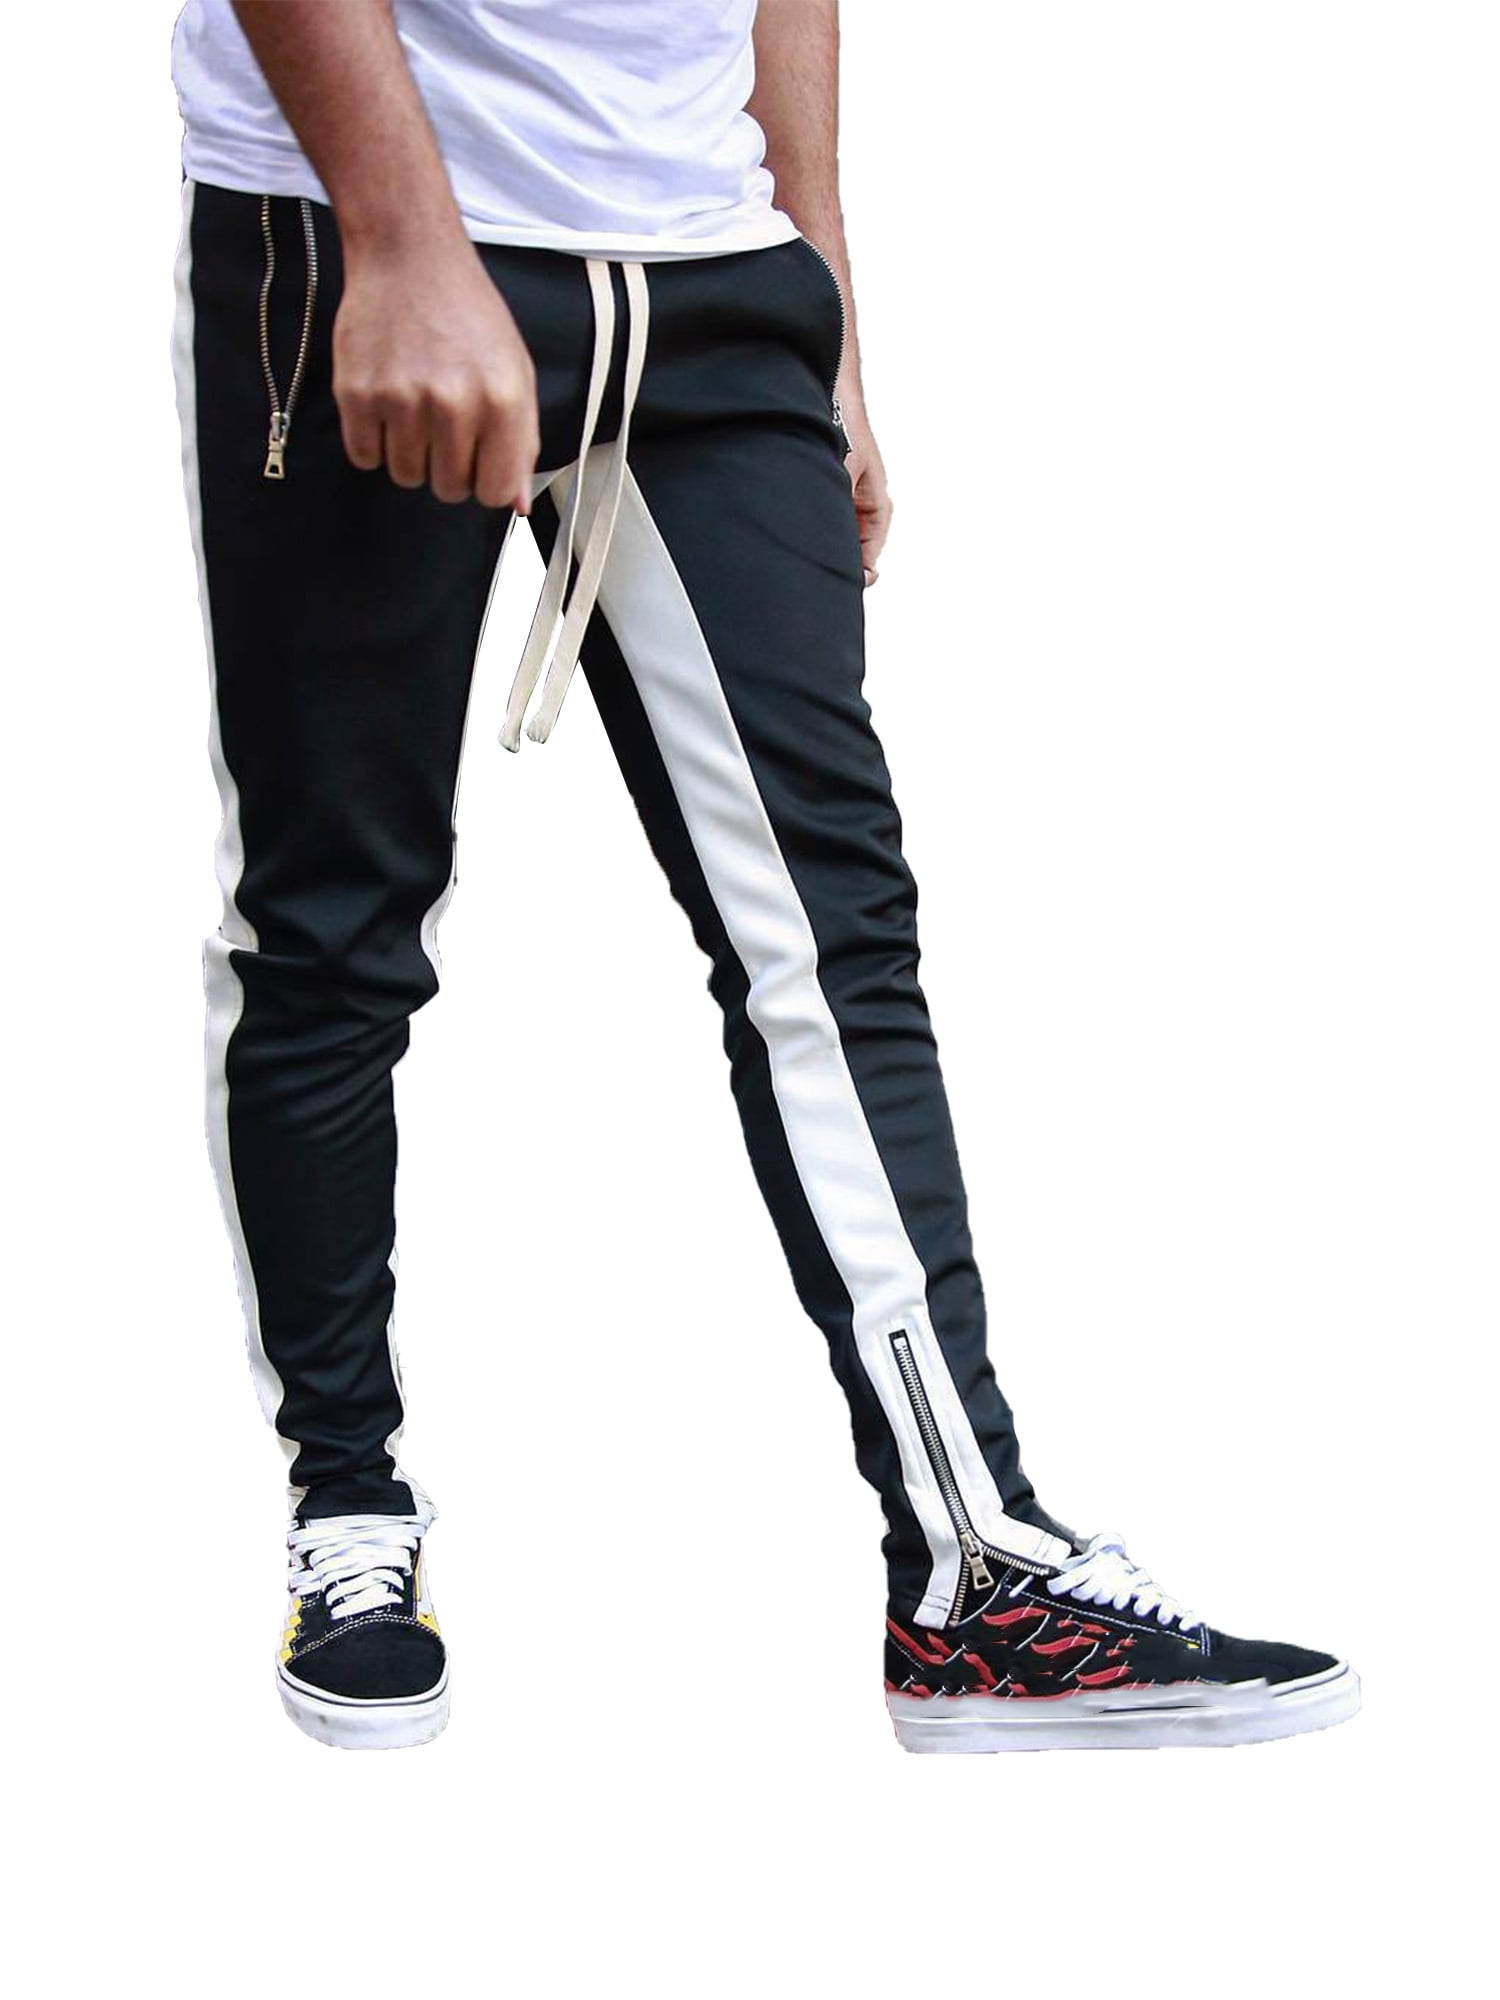 Mens Slim Fit Jogger Pants Camouflage Workout Sweatpants Casual Waist Drawstring Cargo Trouser Winter 3XL Running Pants